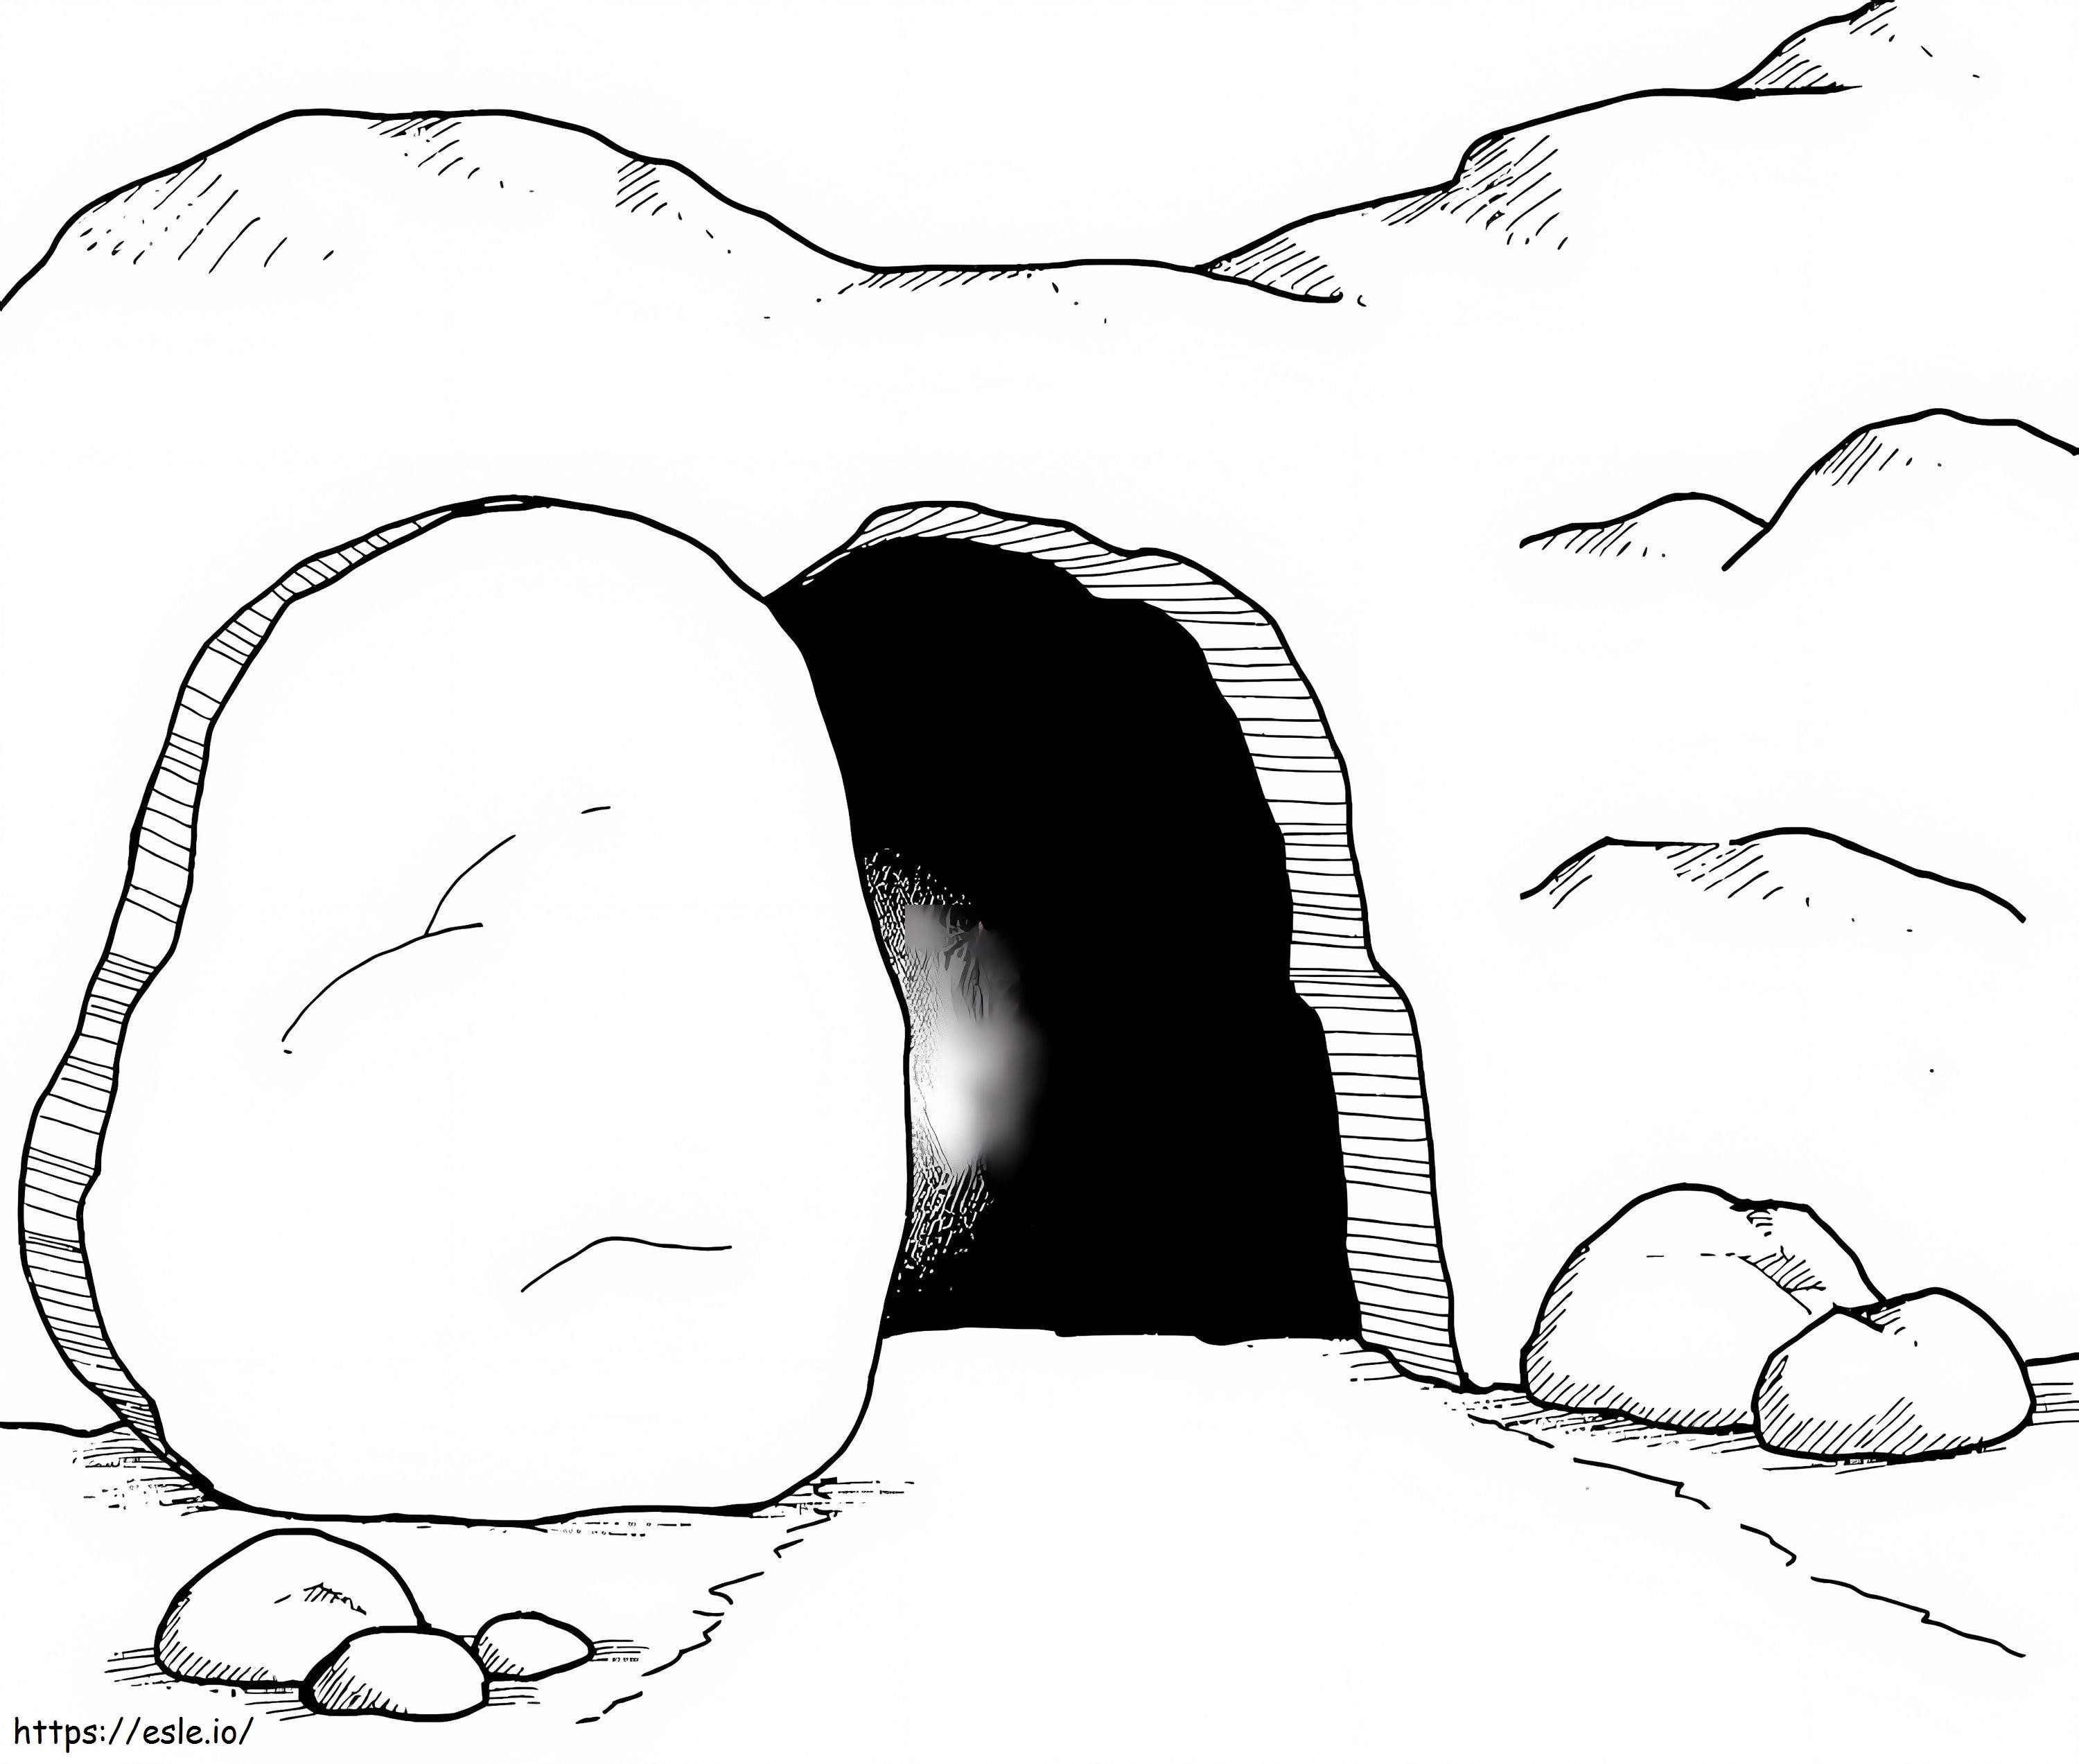 Empty Tomb coloring page